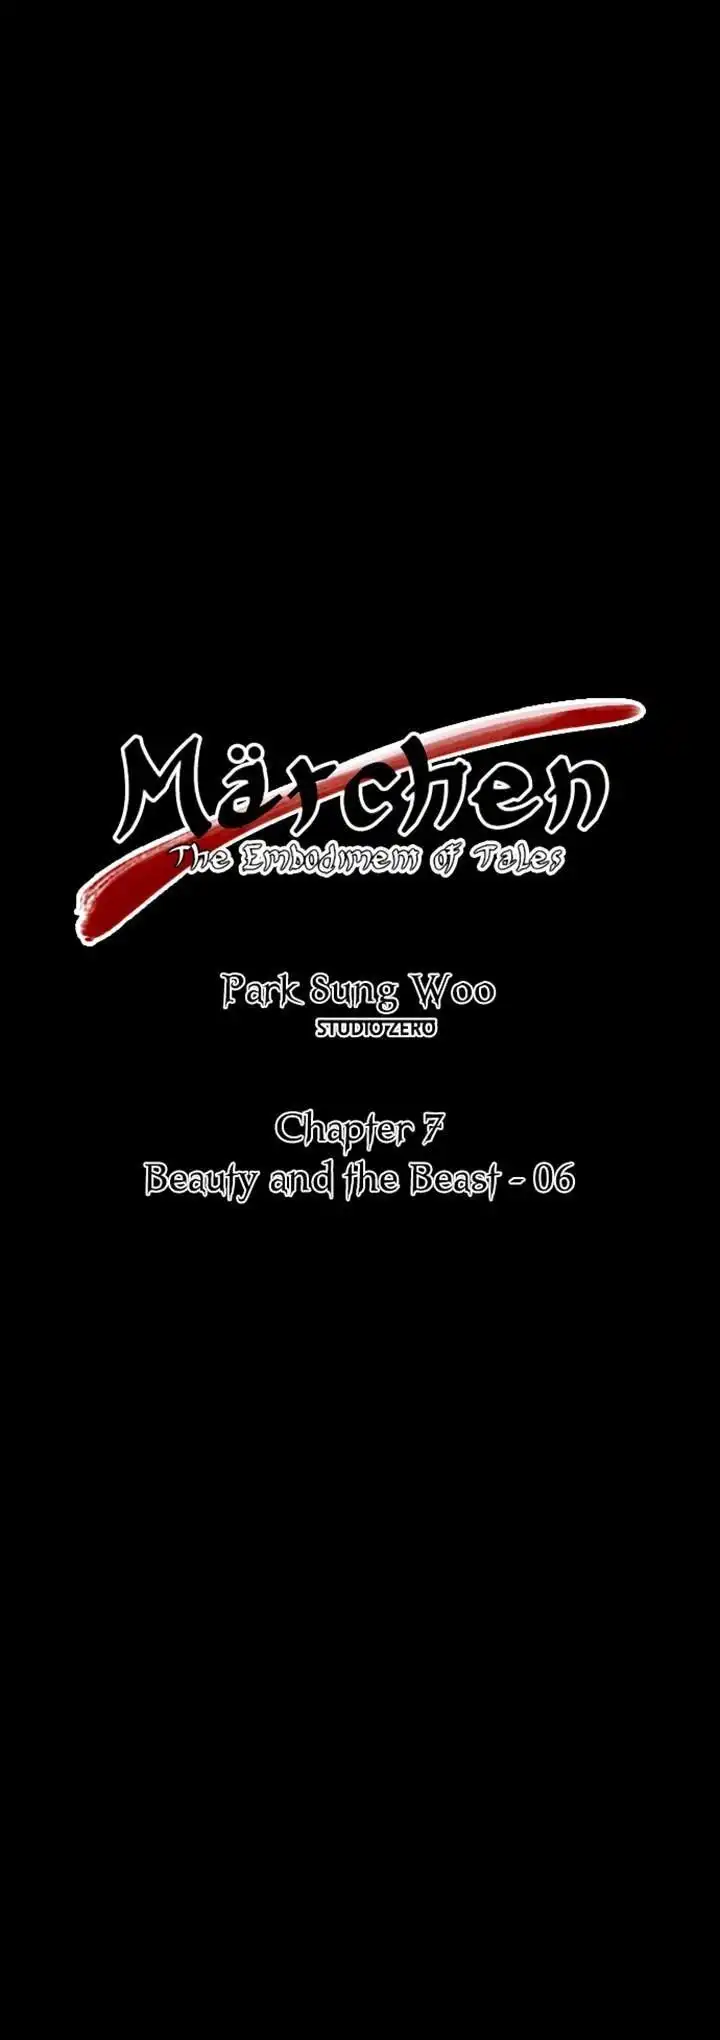 Marchen - The Embodiment of Tales Chapter 7